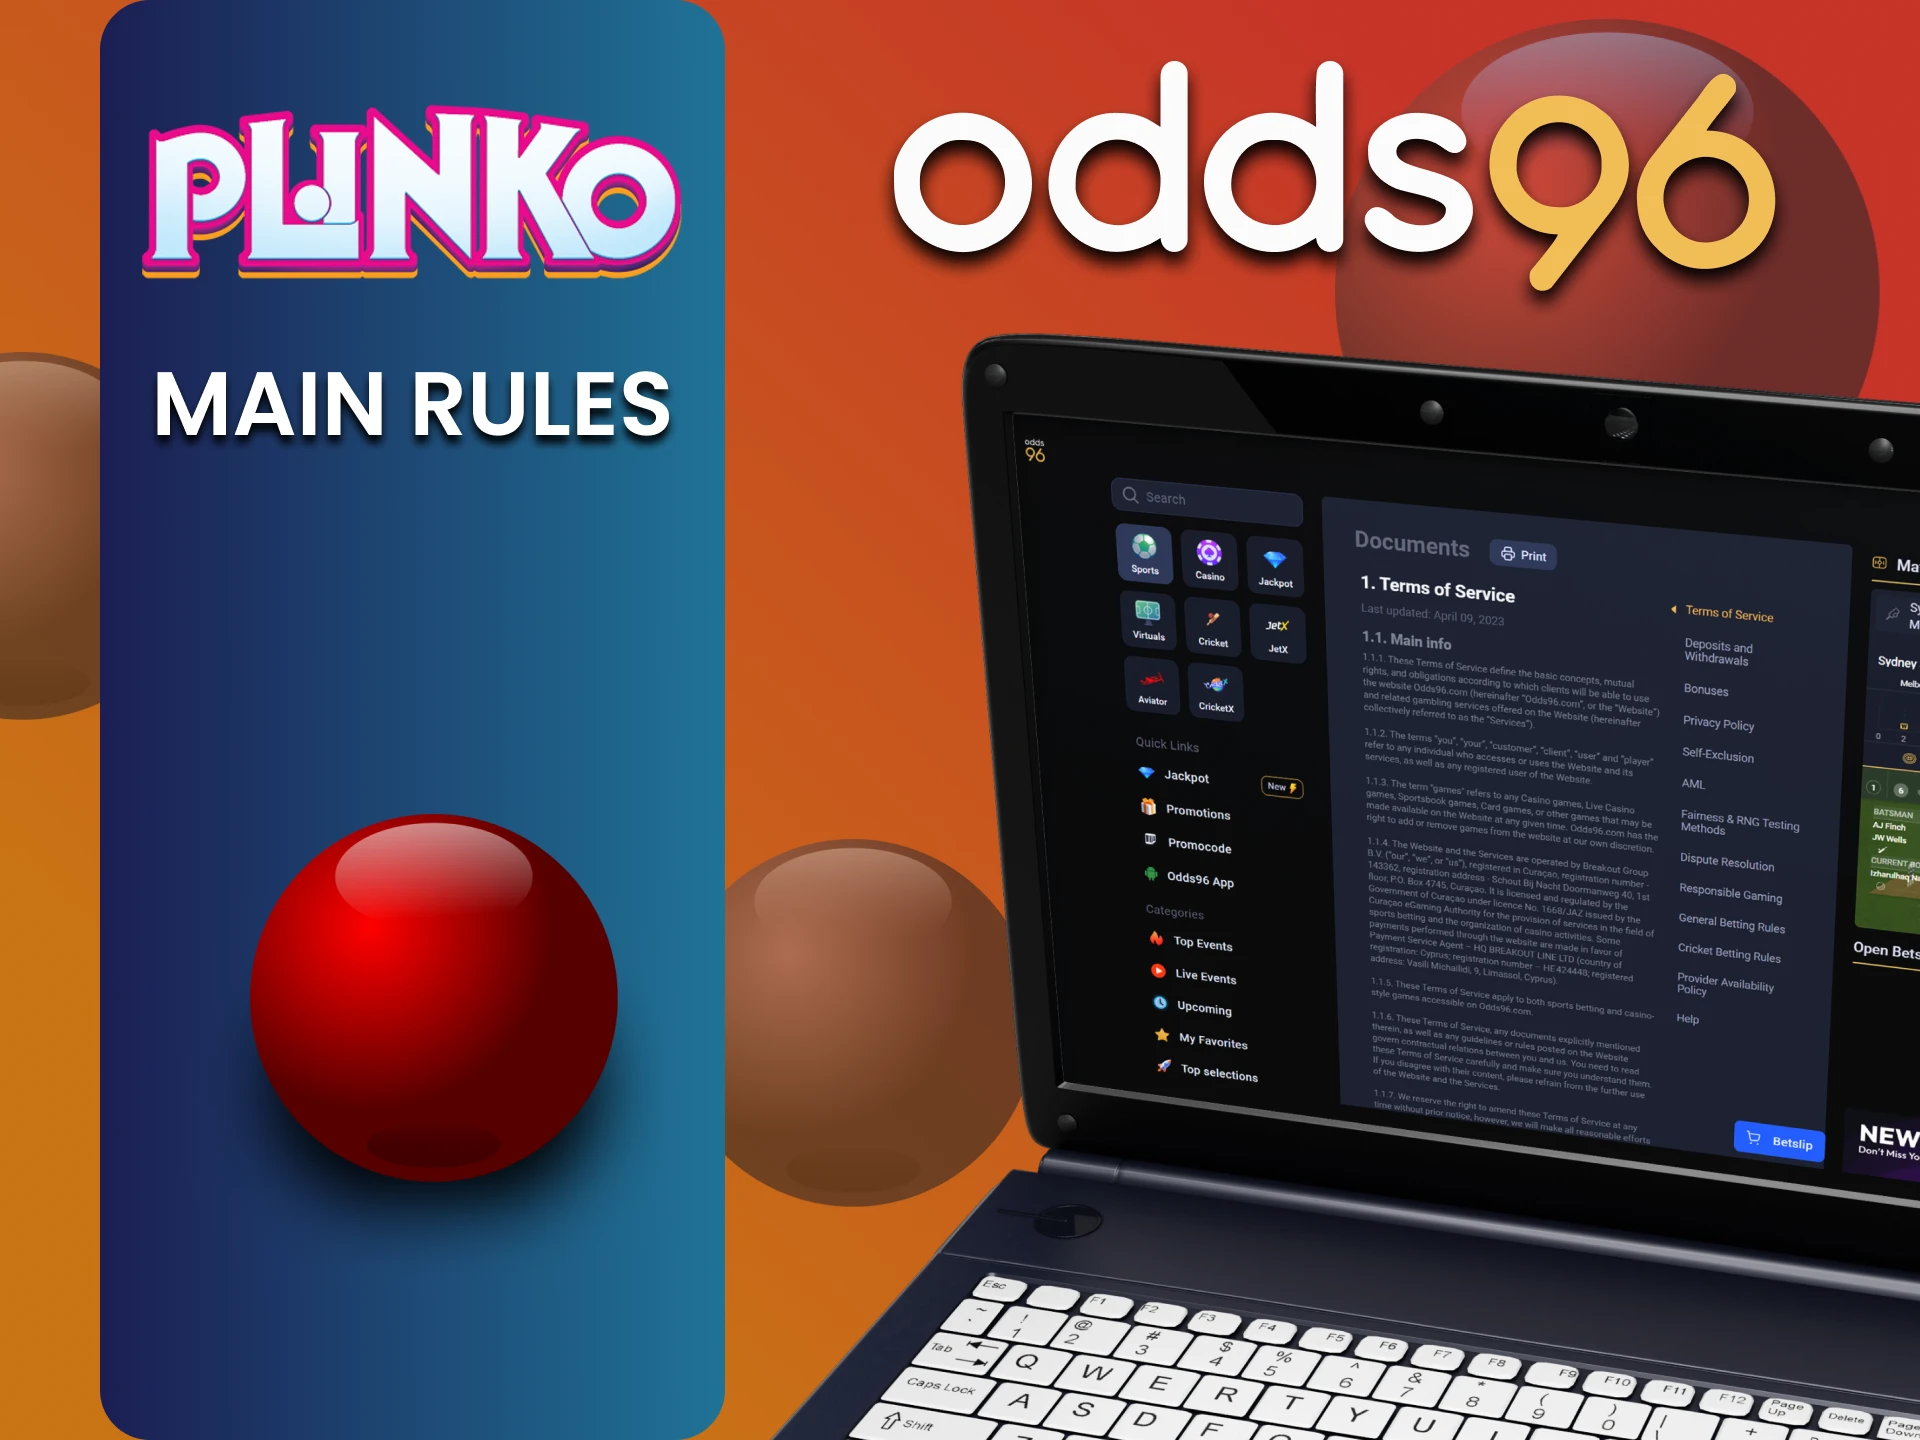 You need to know the rules of the odds96 website to play Plinko.